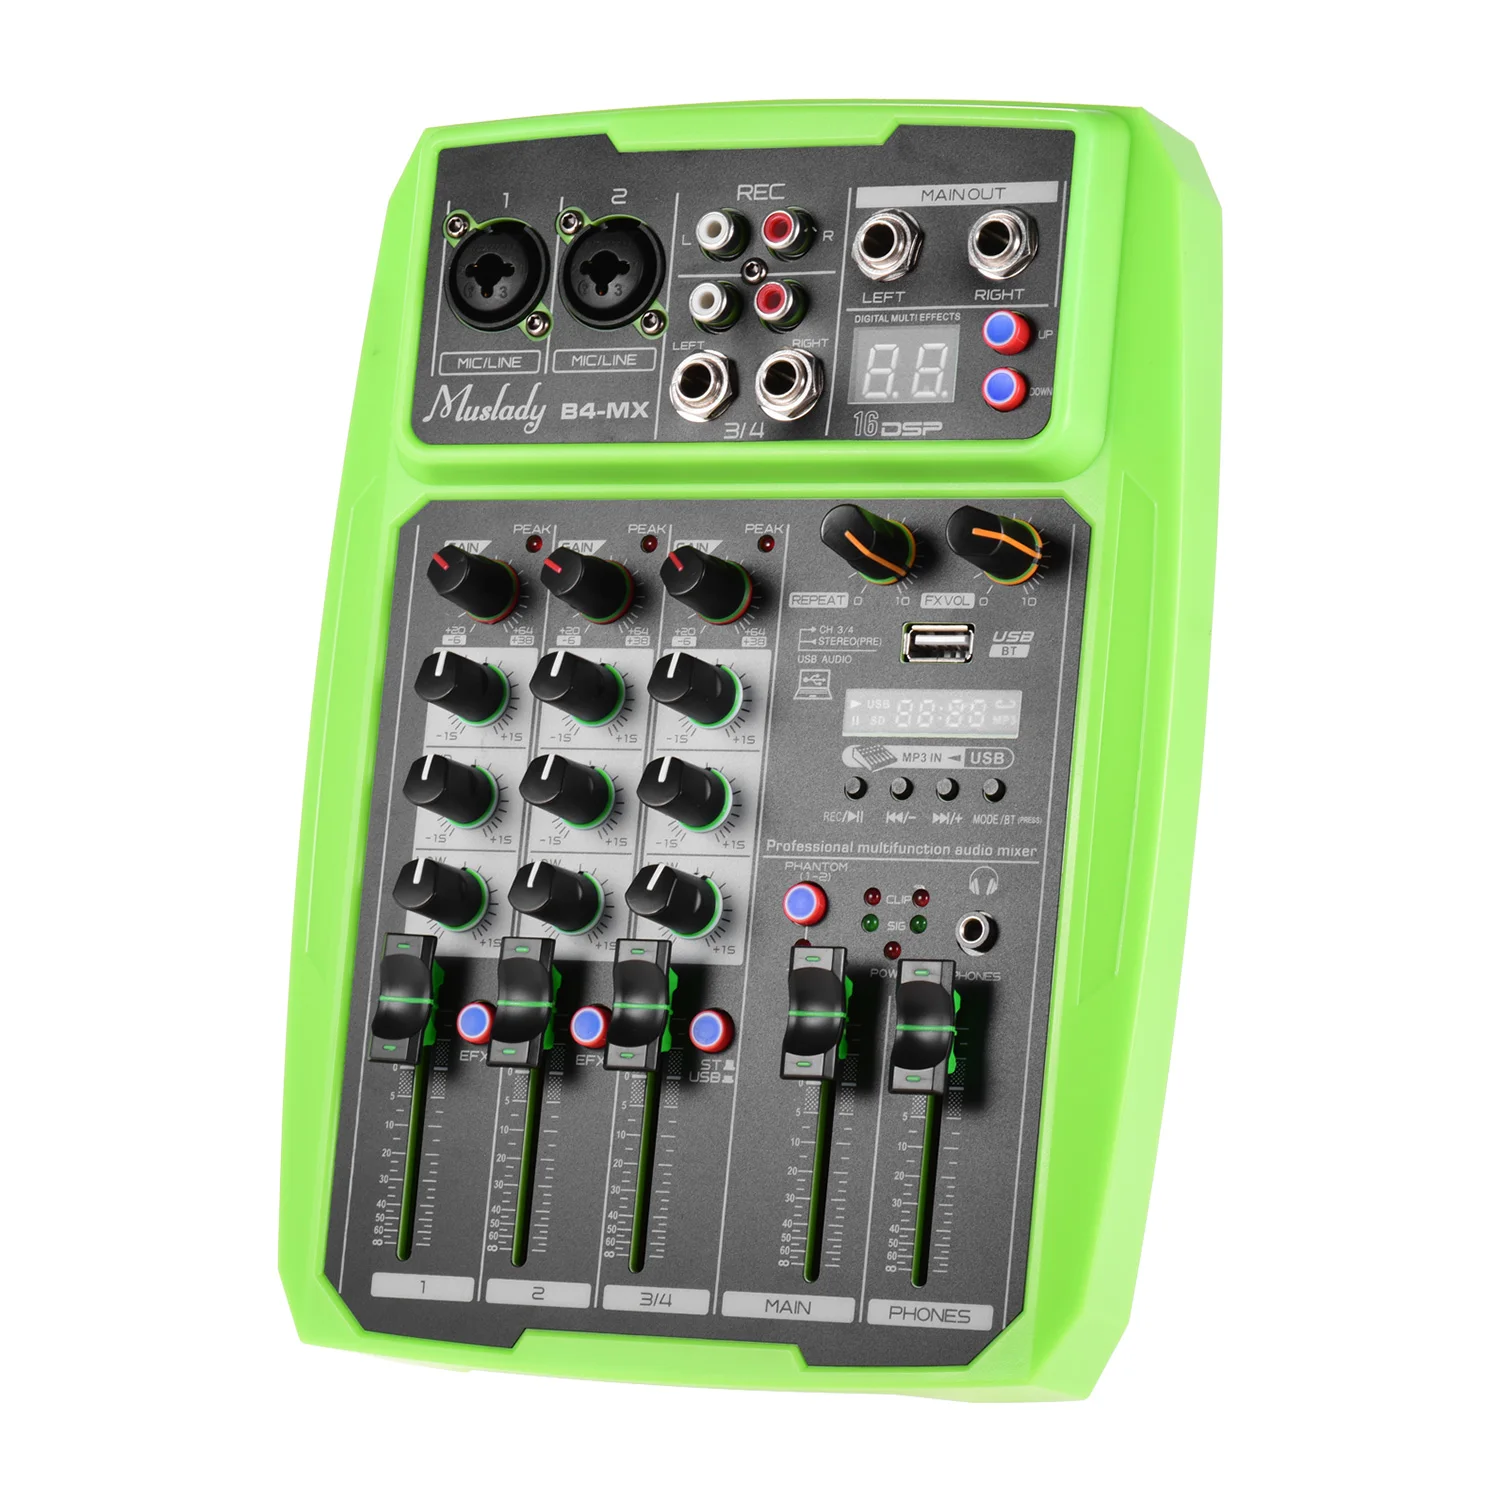 Ktoyols B4 Portable 4 Channels Audio Mixer USB Mixing Console Supports BT Connection with Sound Card Built-in 48V Phantom Power 